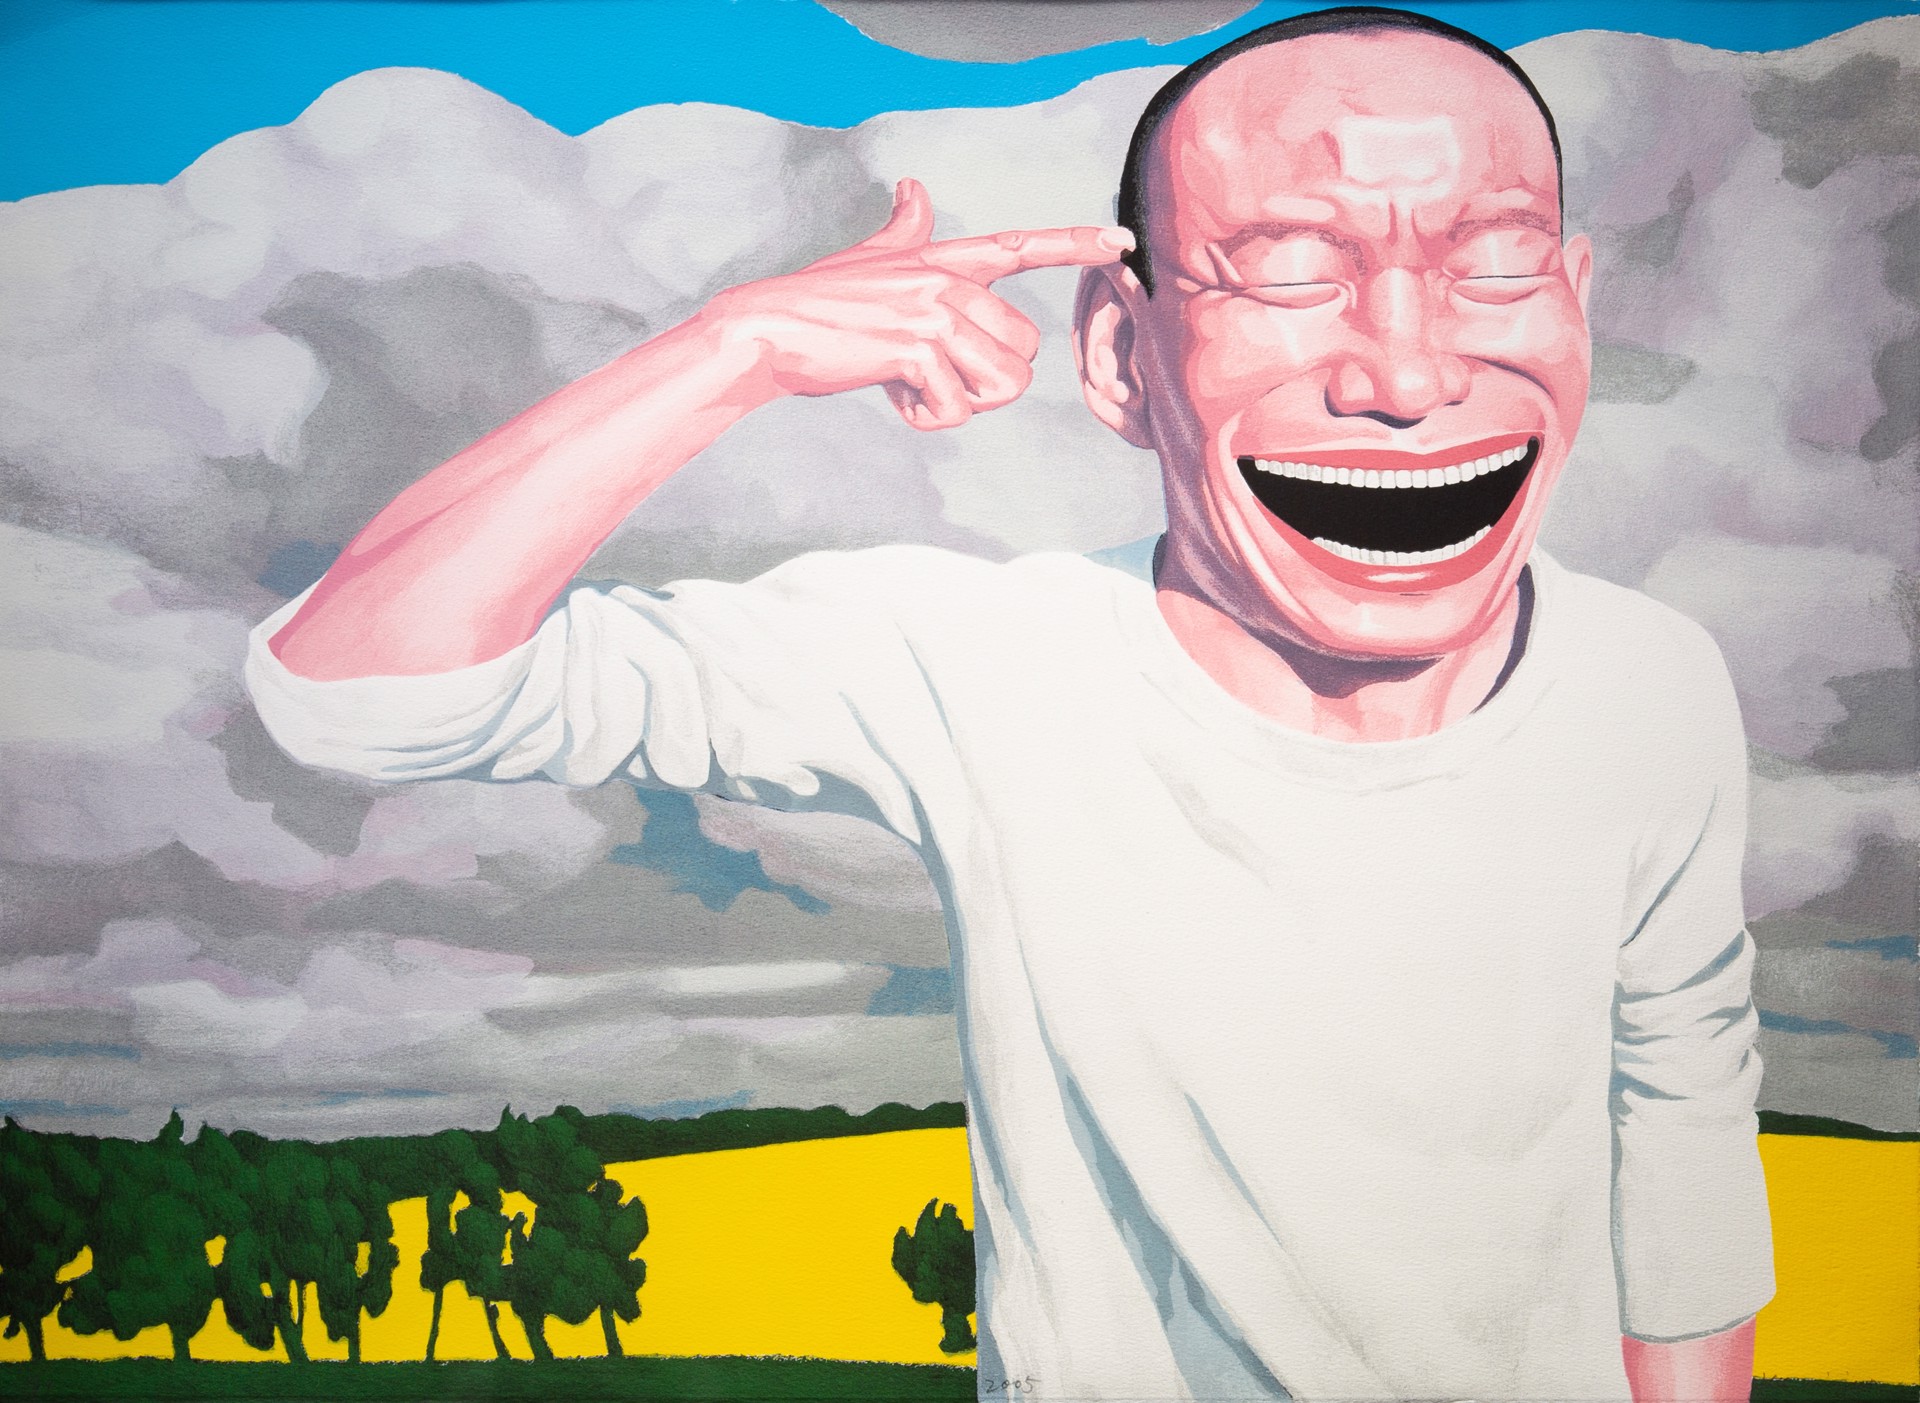 Untitled (from The Giants of Contemporary Chinese Art Portfolio) by Yue Minjun